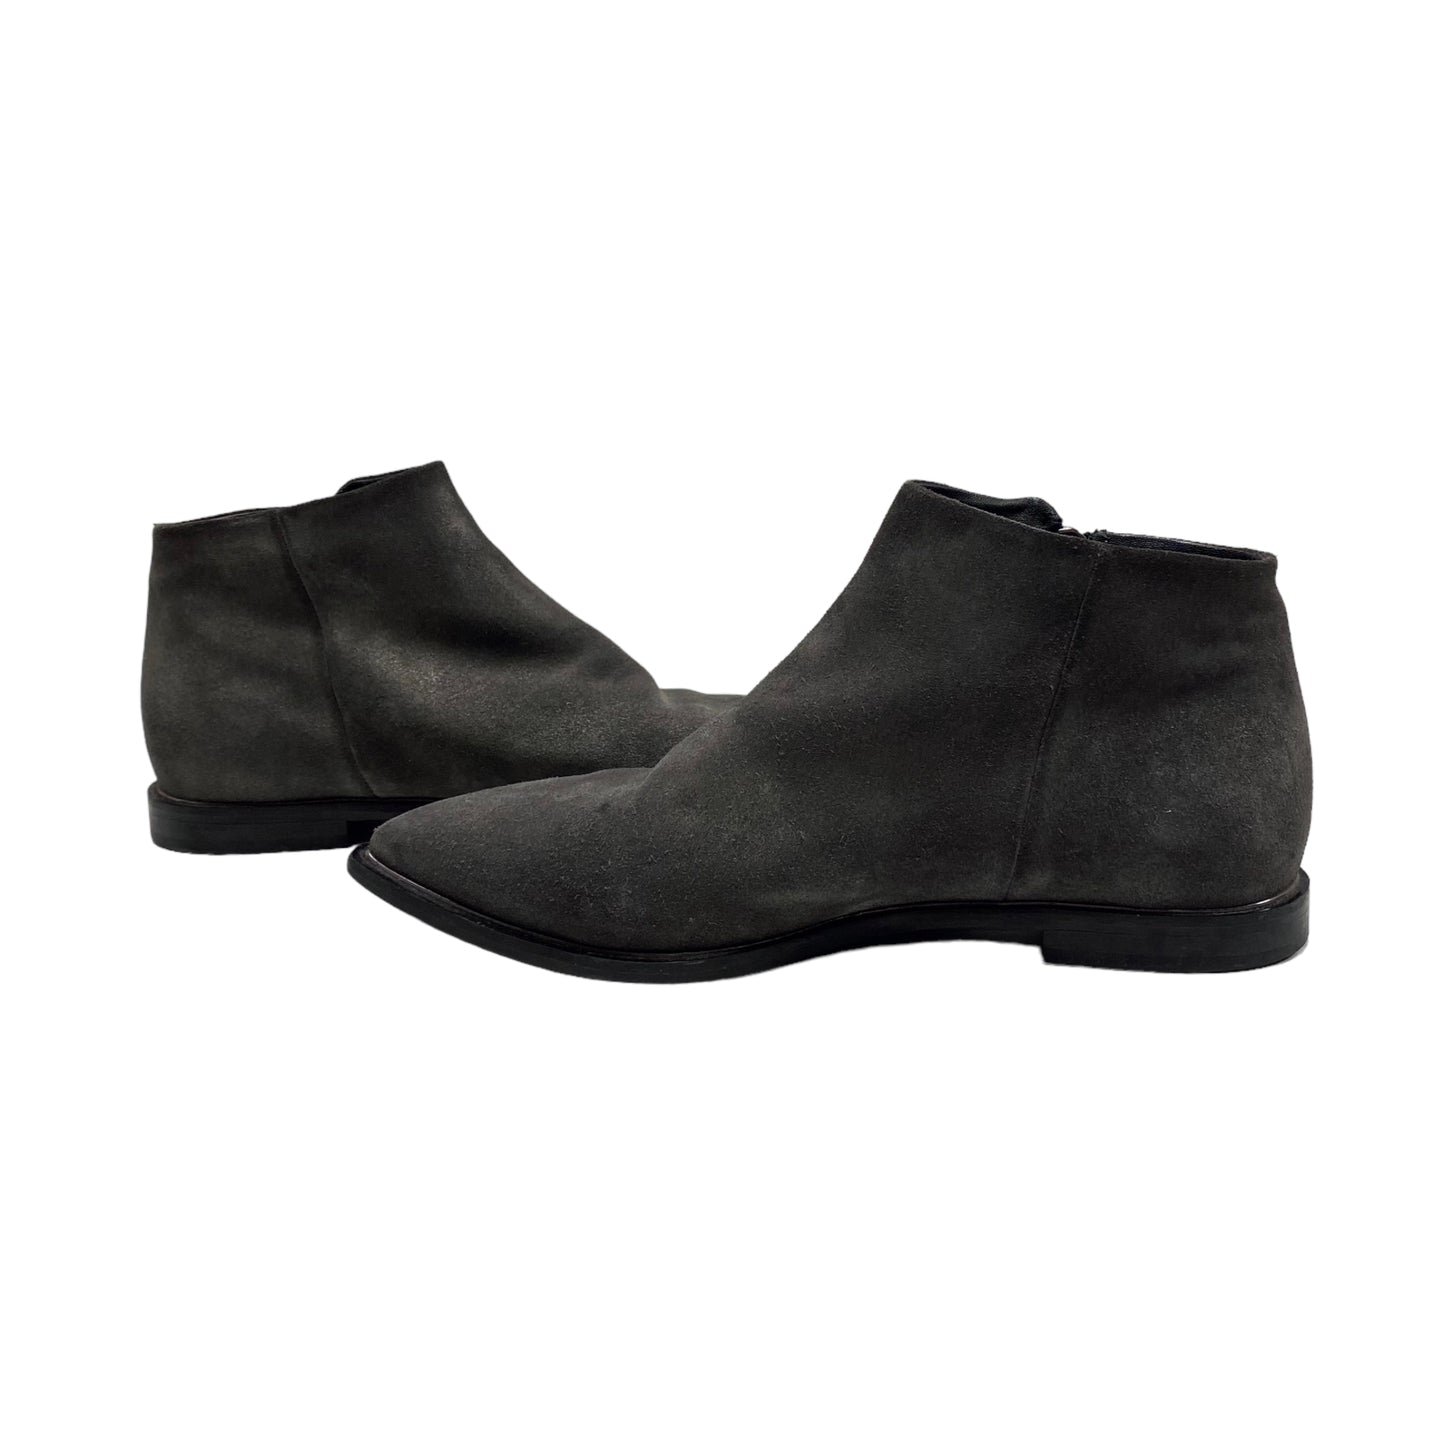 Boots Ankle Flats By Sesto Meucci  Size: 7.5